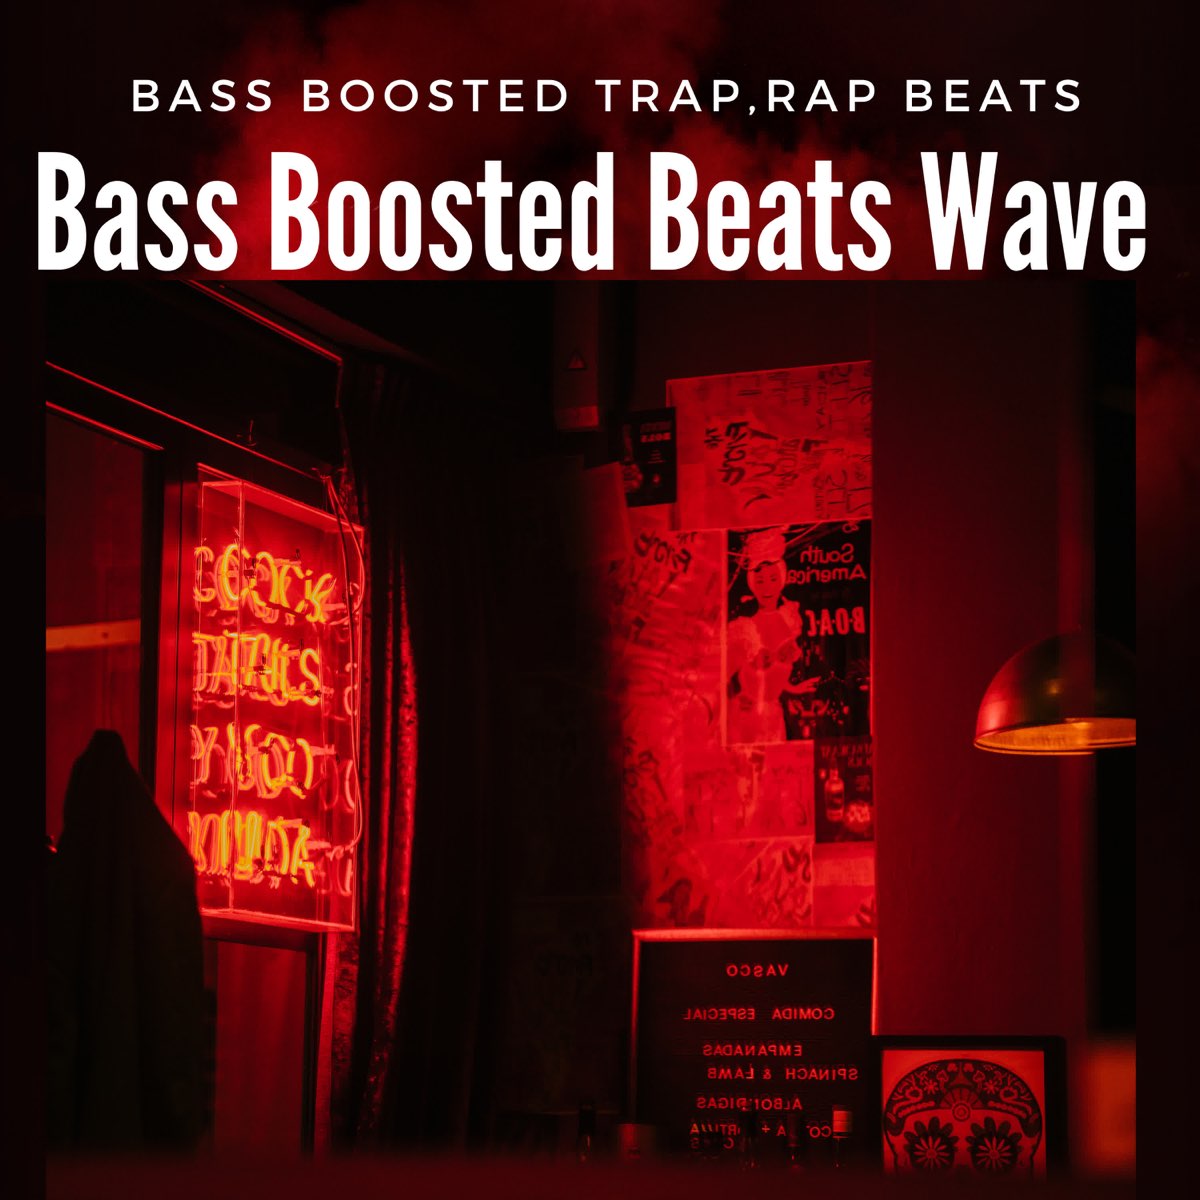 ‎Bass Boosted Trap, Rap Beats by Bass Boosted Beats Wave on Apple Music